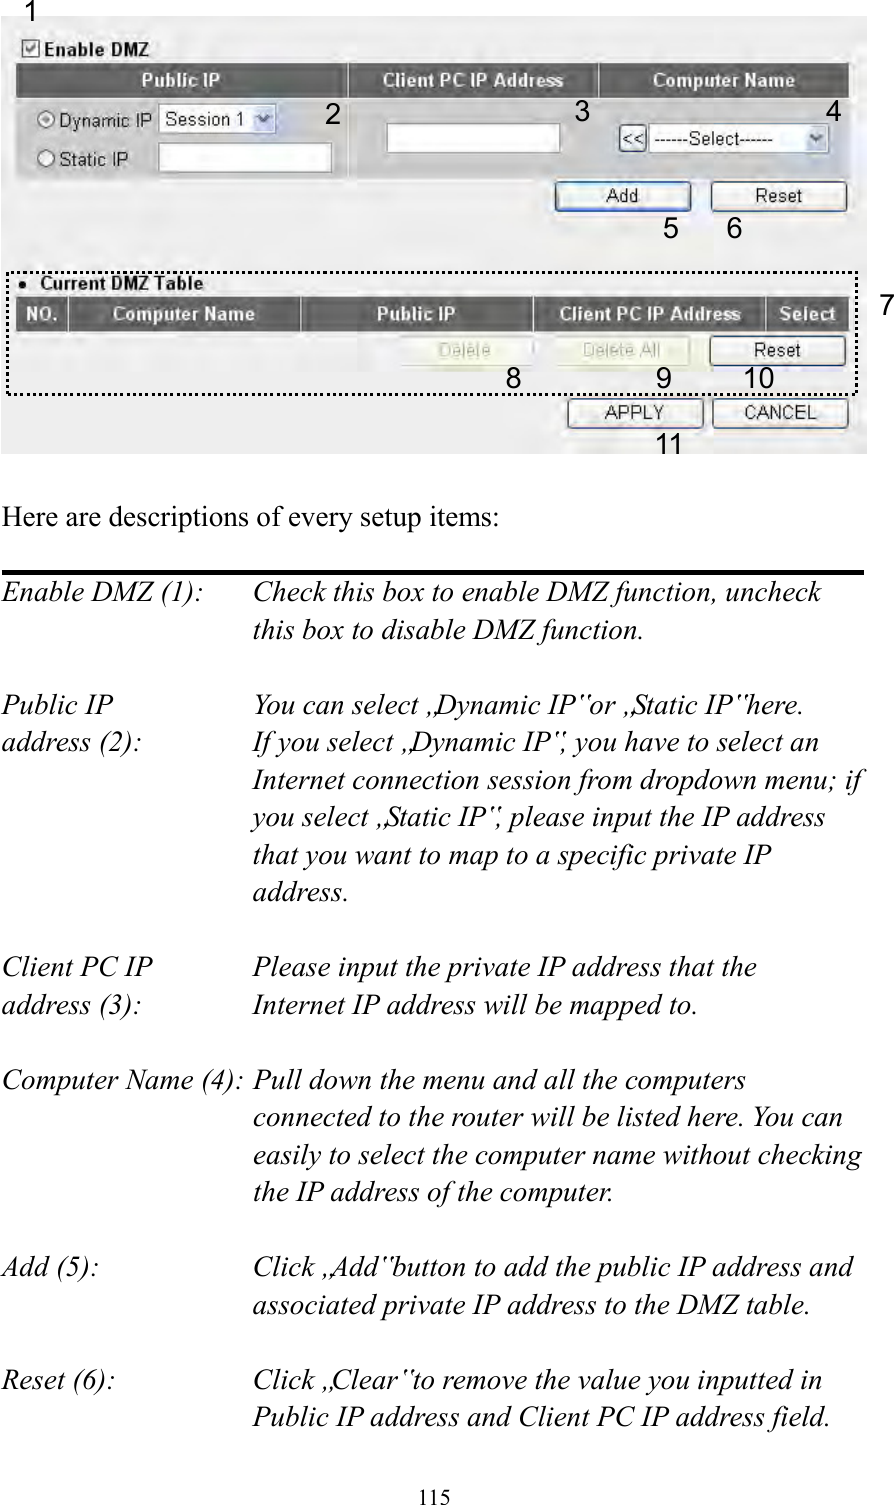  115   Here are descriptions of every setup items:  Enable DMZ (1):    Check this box to enable DMZ function, uncheck this box to disable DMZ function.  Public IP        You can select „Dynamic IP‟ or „Static IP‟ here. address (2):    If you select „Dynamic IP‟, you have to select an Internet connection session from dropdown menu; if you select „Static IP‟, please input the IP address that you want to map to a specific private IP address.  Client PC IP      Please input the private IP address that the address (3):      Internet IP address will be mapped to.  Computer Name (4): Pull down the menu and all the computers connected to the router will be listed here. You can easily to select the computer name without checking the IP address of the computer.  Add (5):    Click „Add‟ button to add the public IP address and associated private IP address to the DMZ table.  Reset (6):    Click „Clear‟ to remove the value you inputted in Public IP address and Client PC IP address field. 1 2 4 5 6 7 8 9 10 11 3 